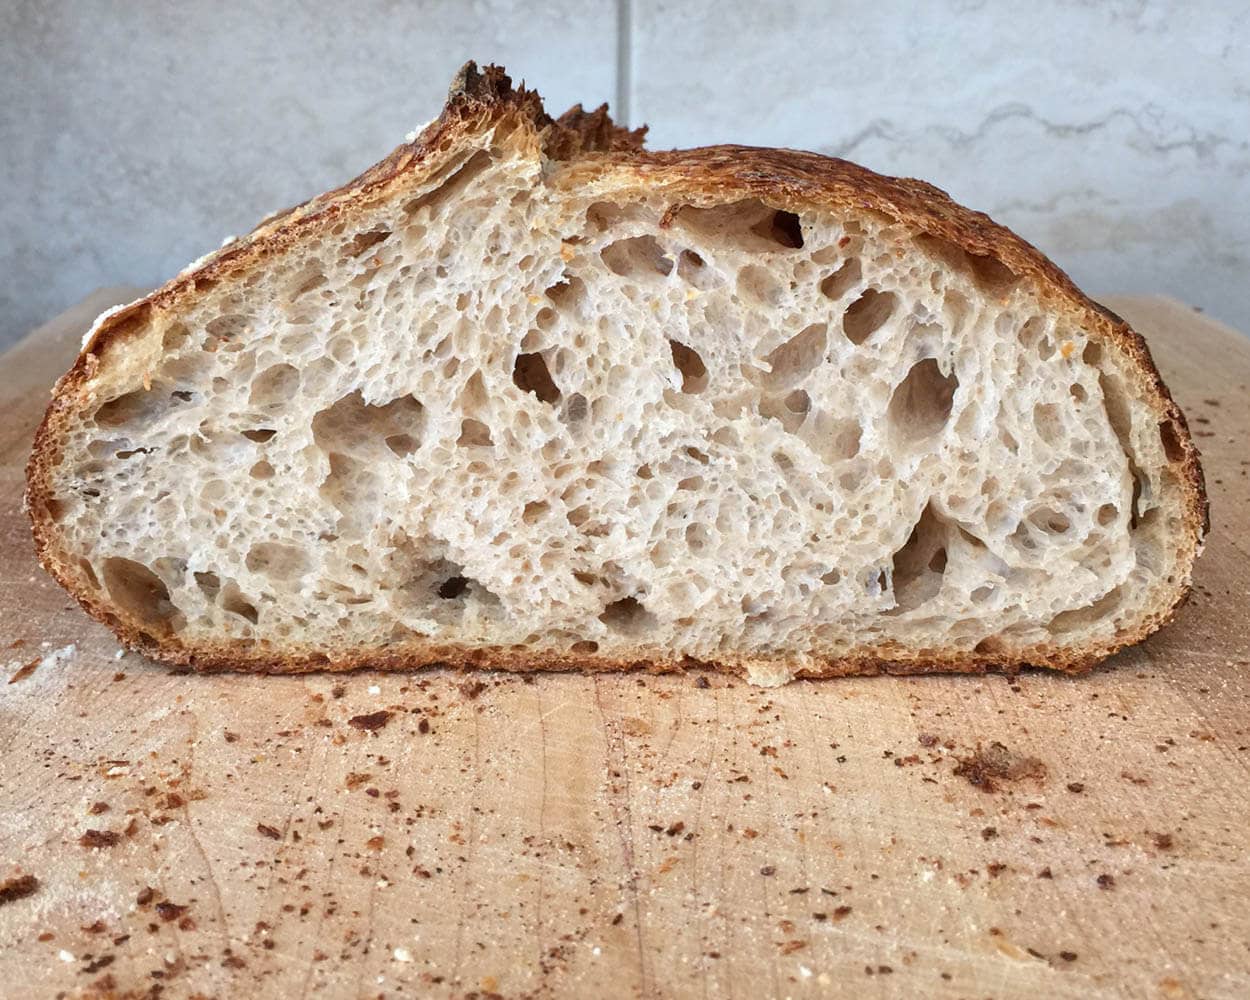 Naturally leavened sourdough, baking with steam in home oven